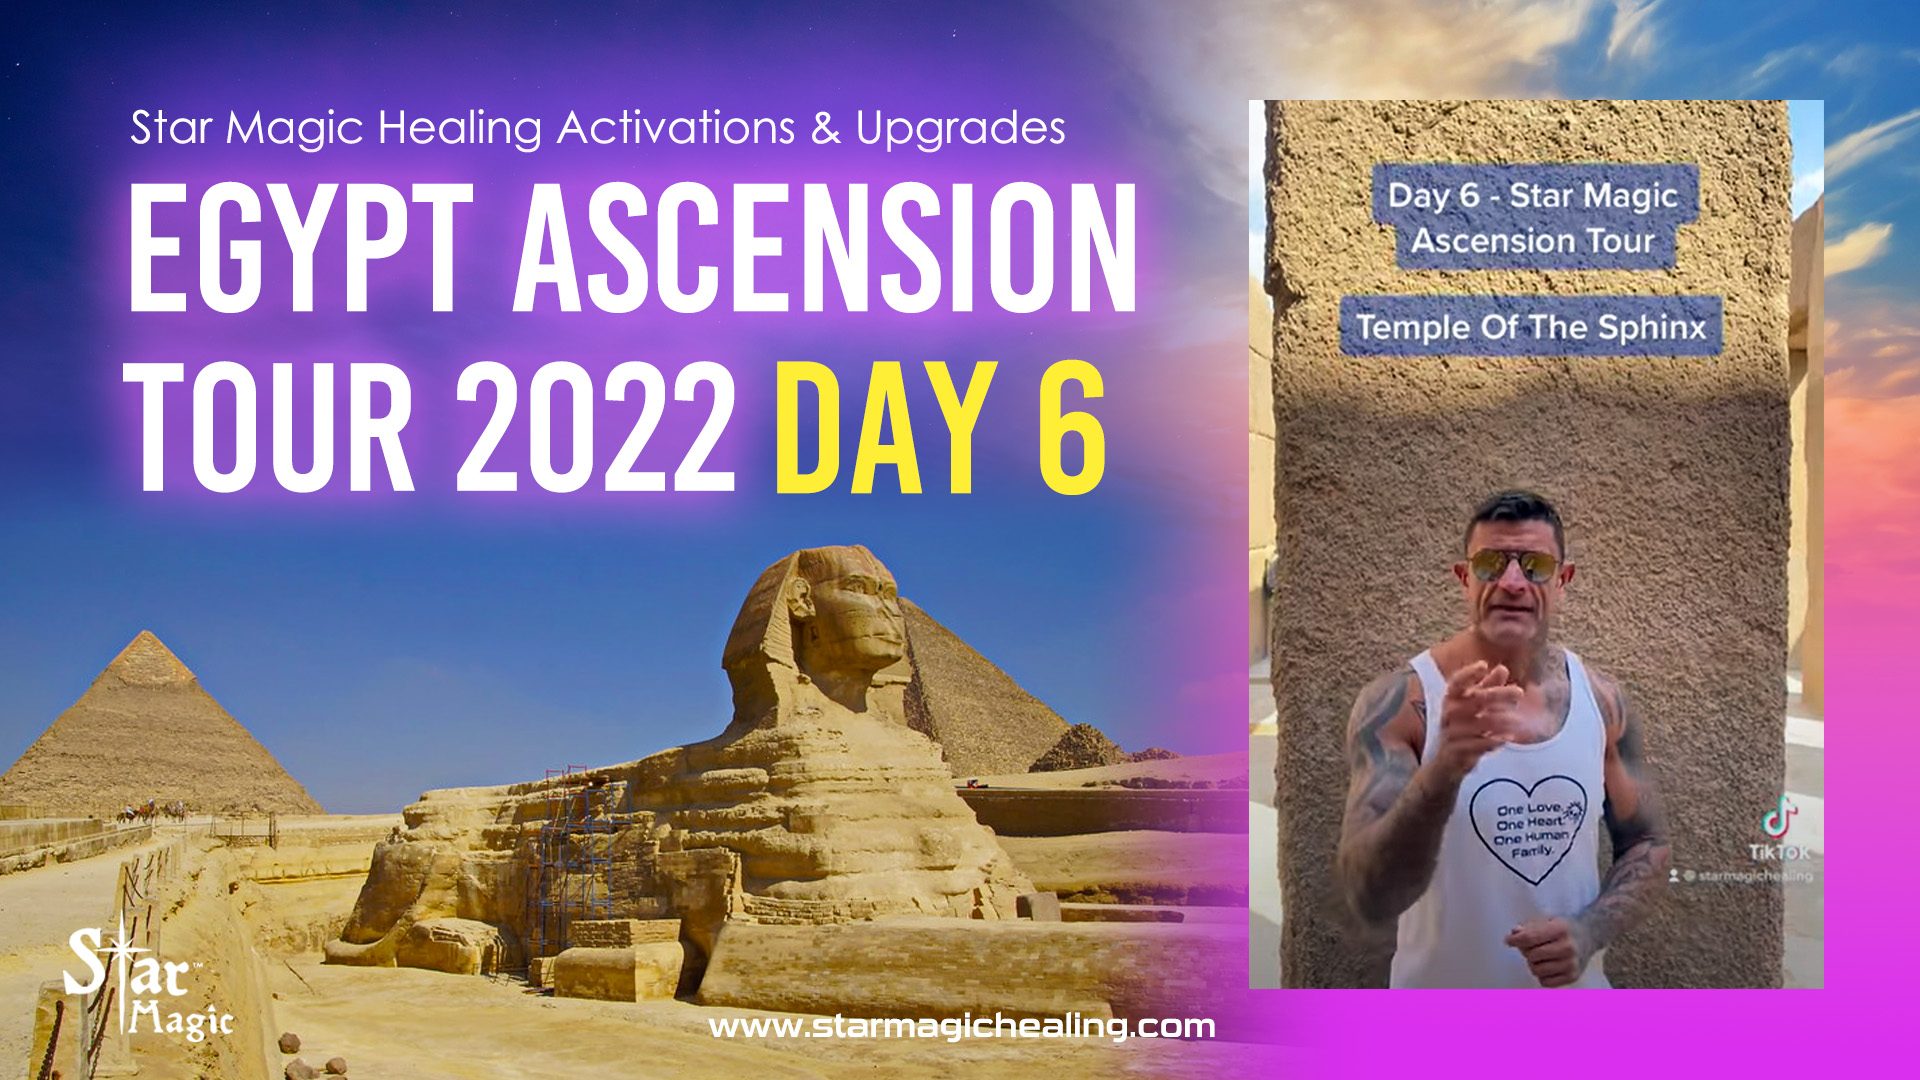 Star Magic Egypt Ascension Tour Day 6 – Activations & Upgrades